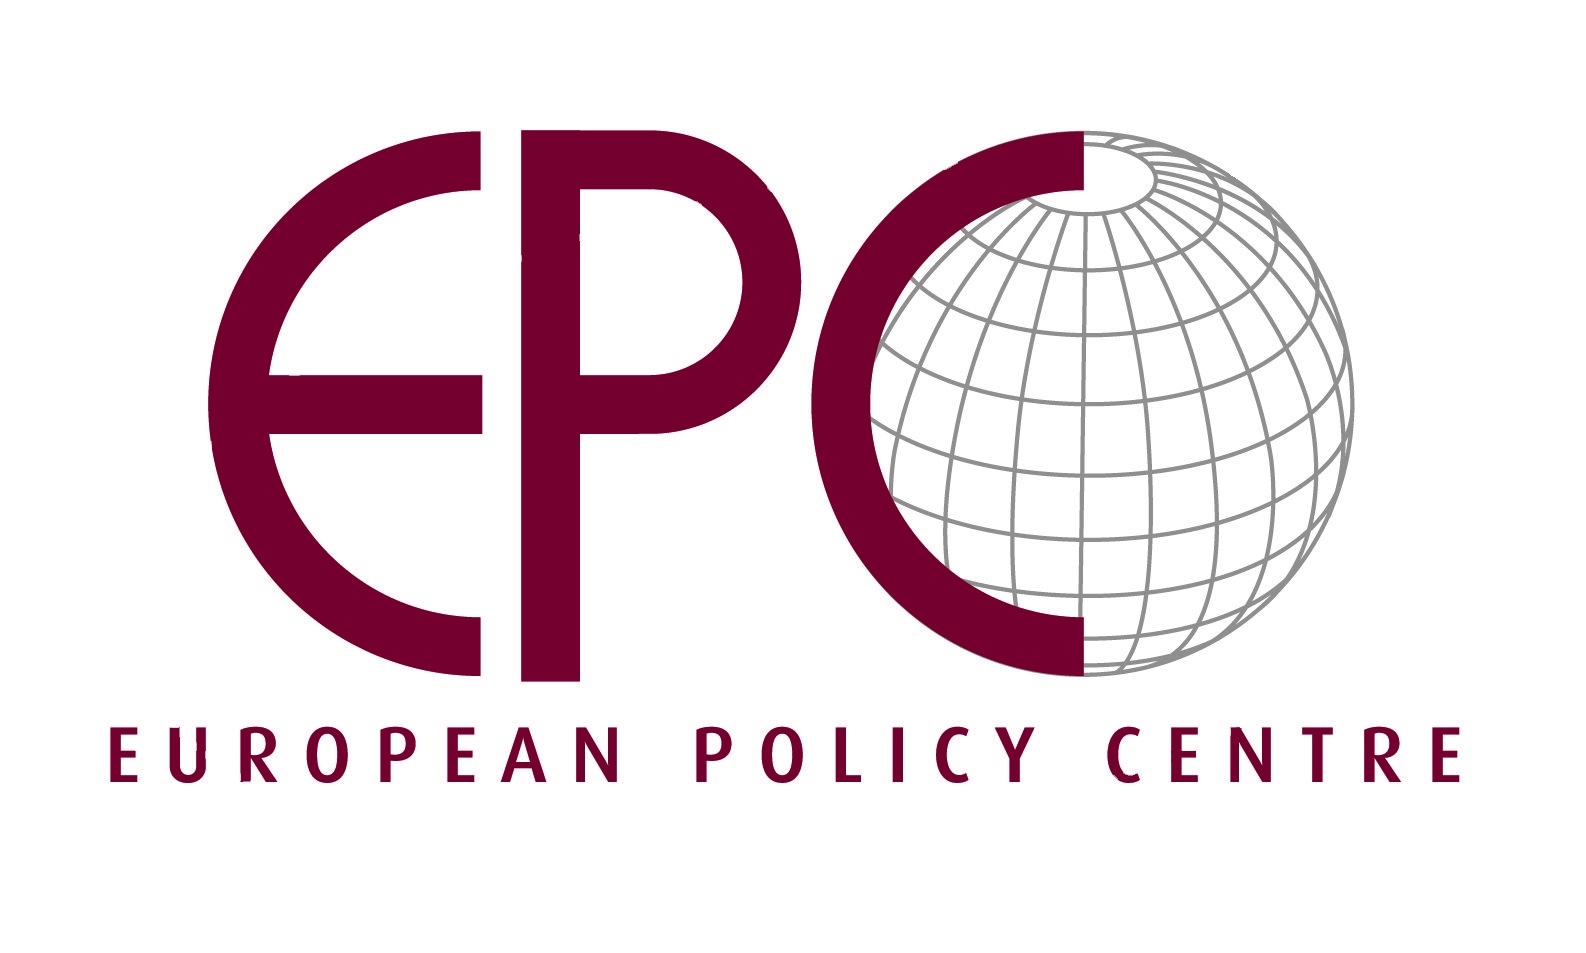 Partnership agreement with one of the leading European think tanks